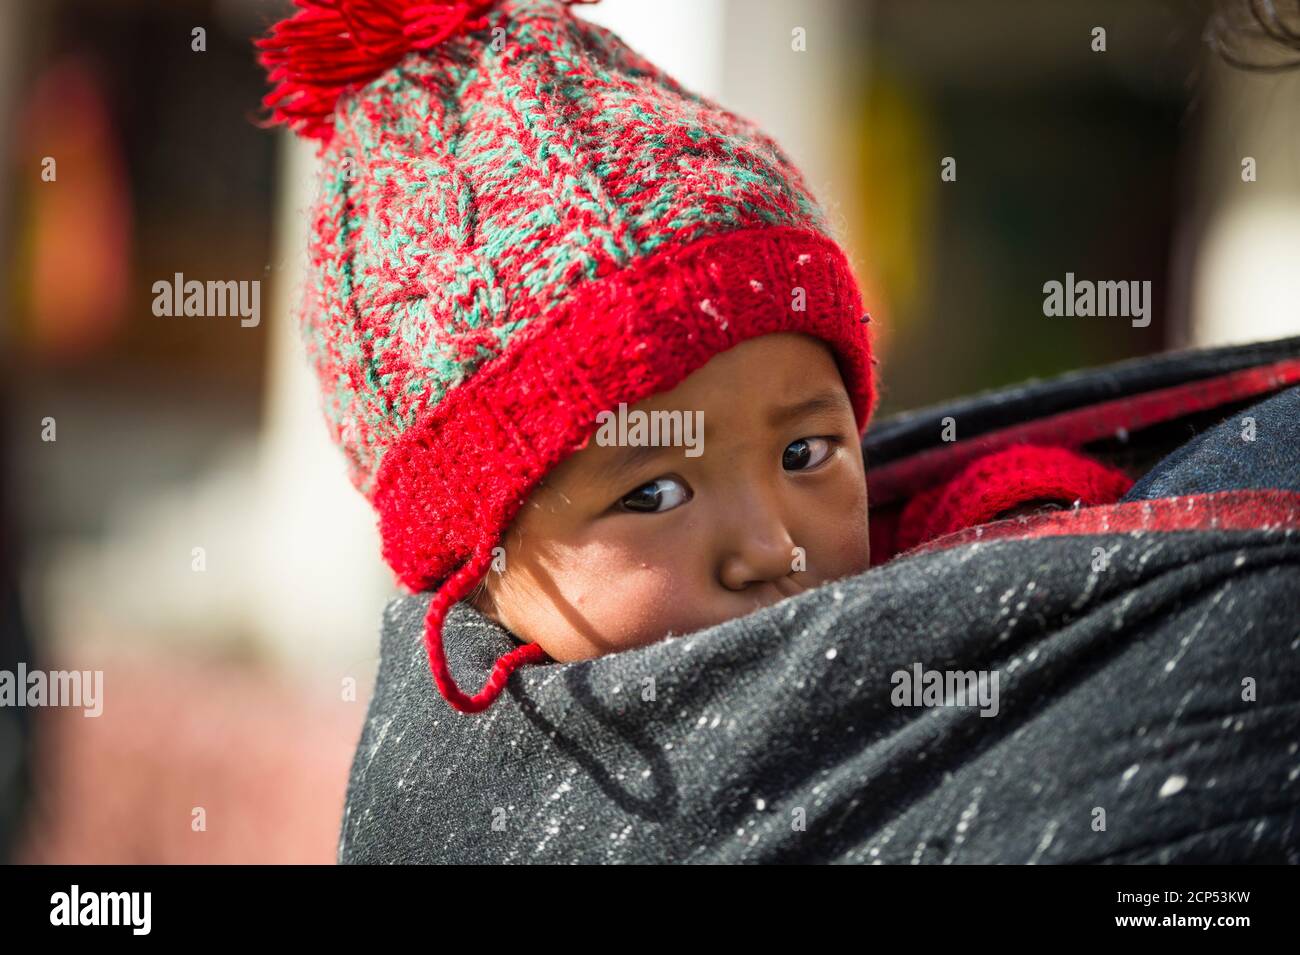 Padum, people are waiting for the Dalai Lama, portrait, suffering is birth Stock Photo